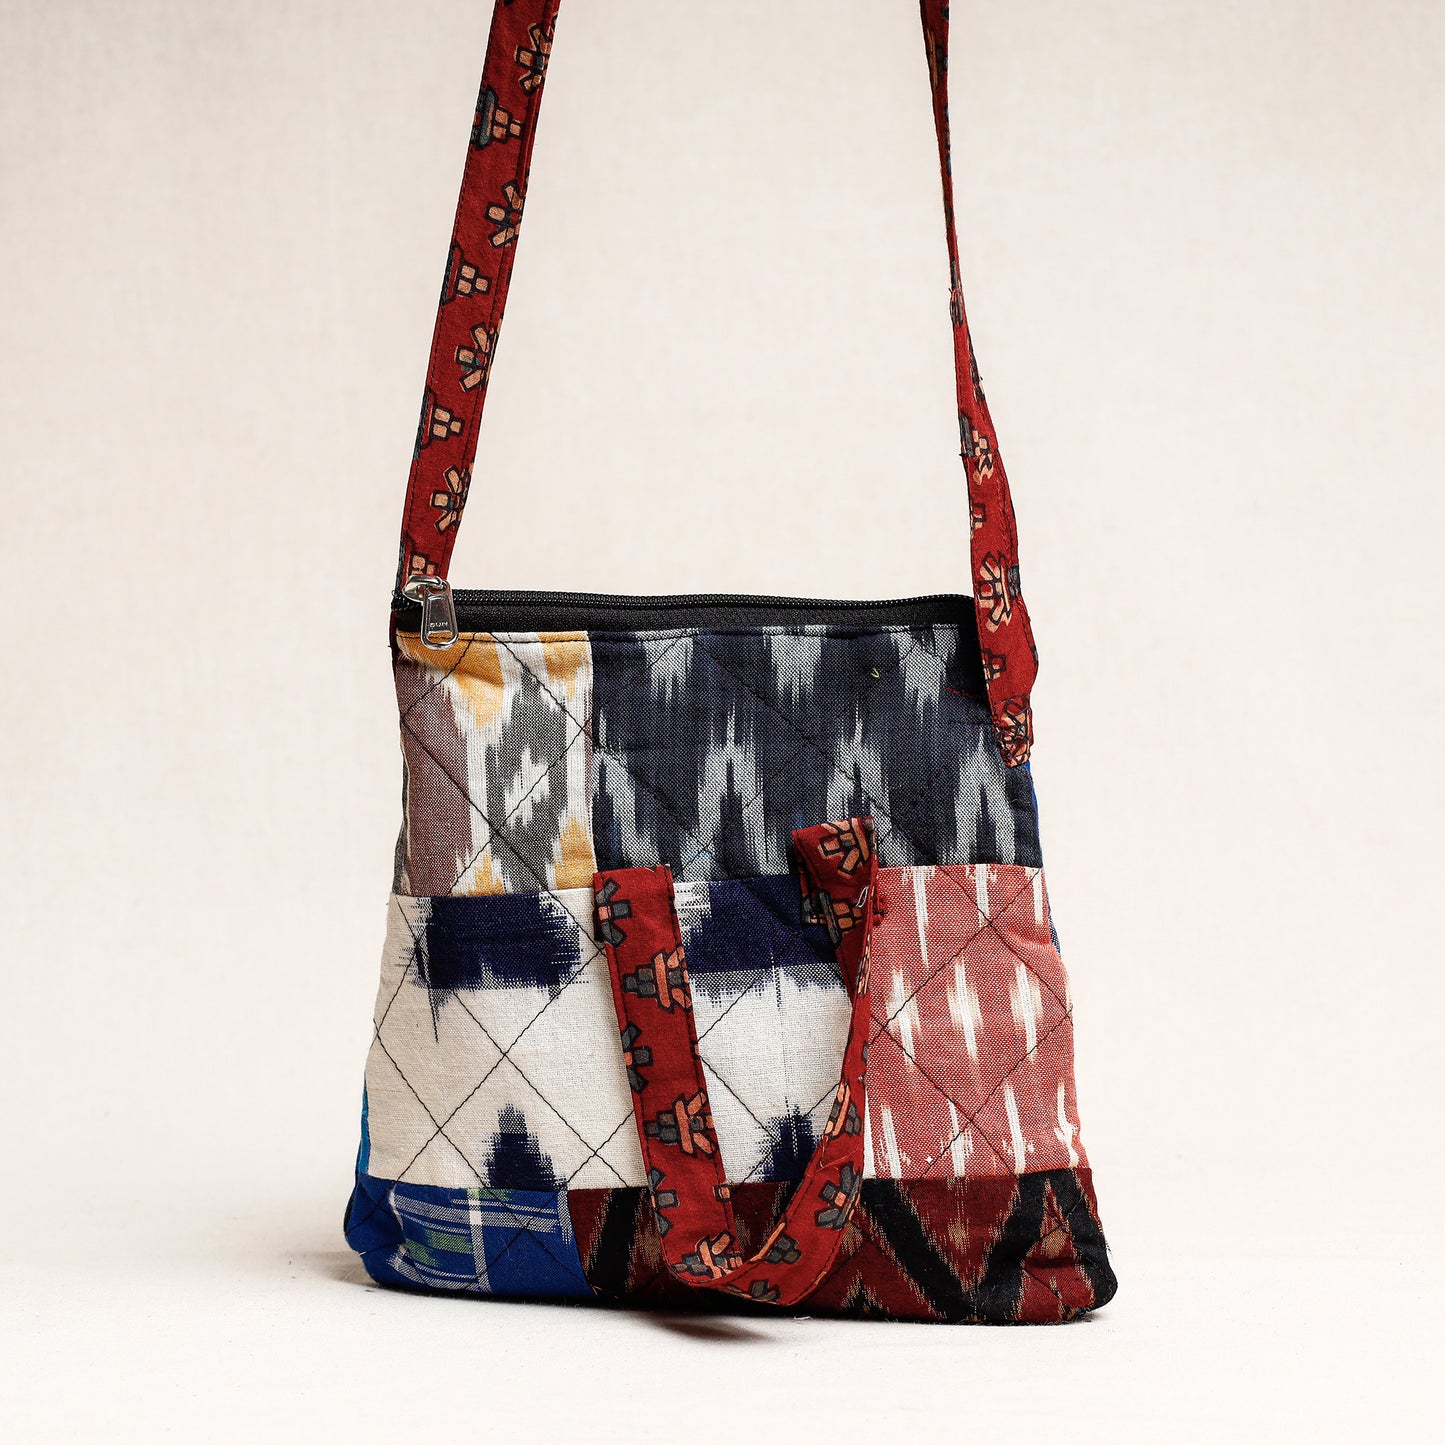 Multicolor - Handmade Block Printed Quilted Cotton Patchwork Sling Bag